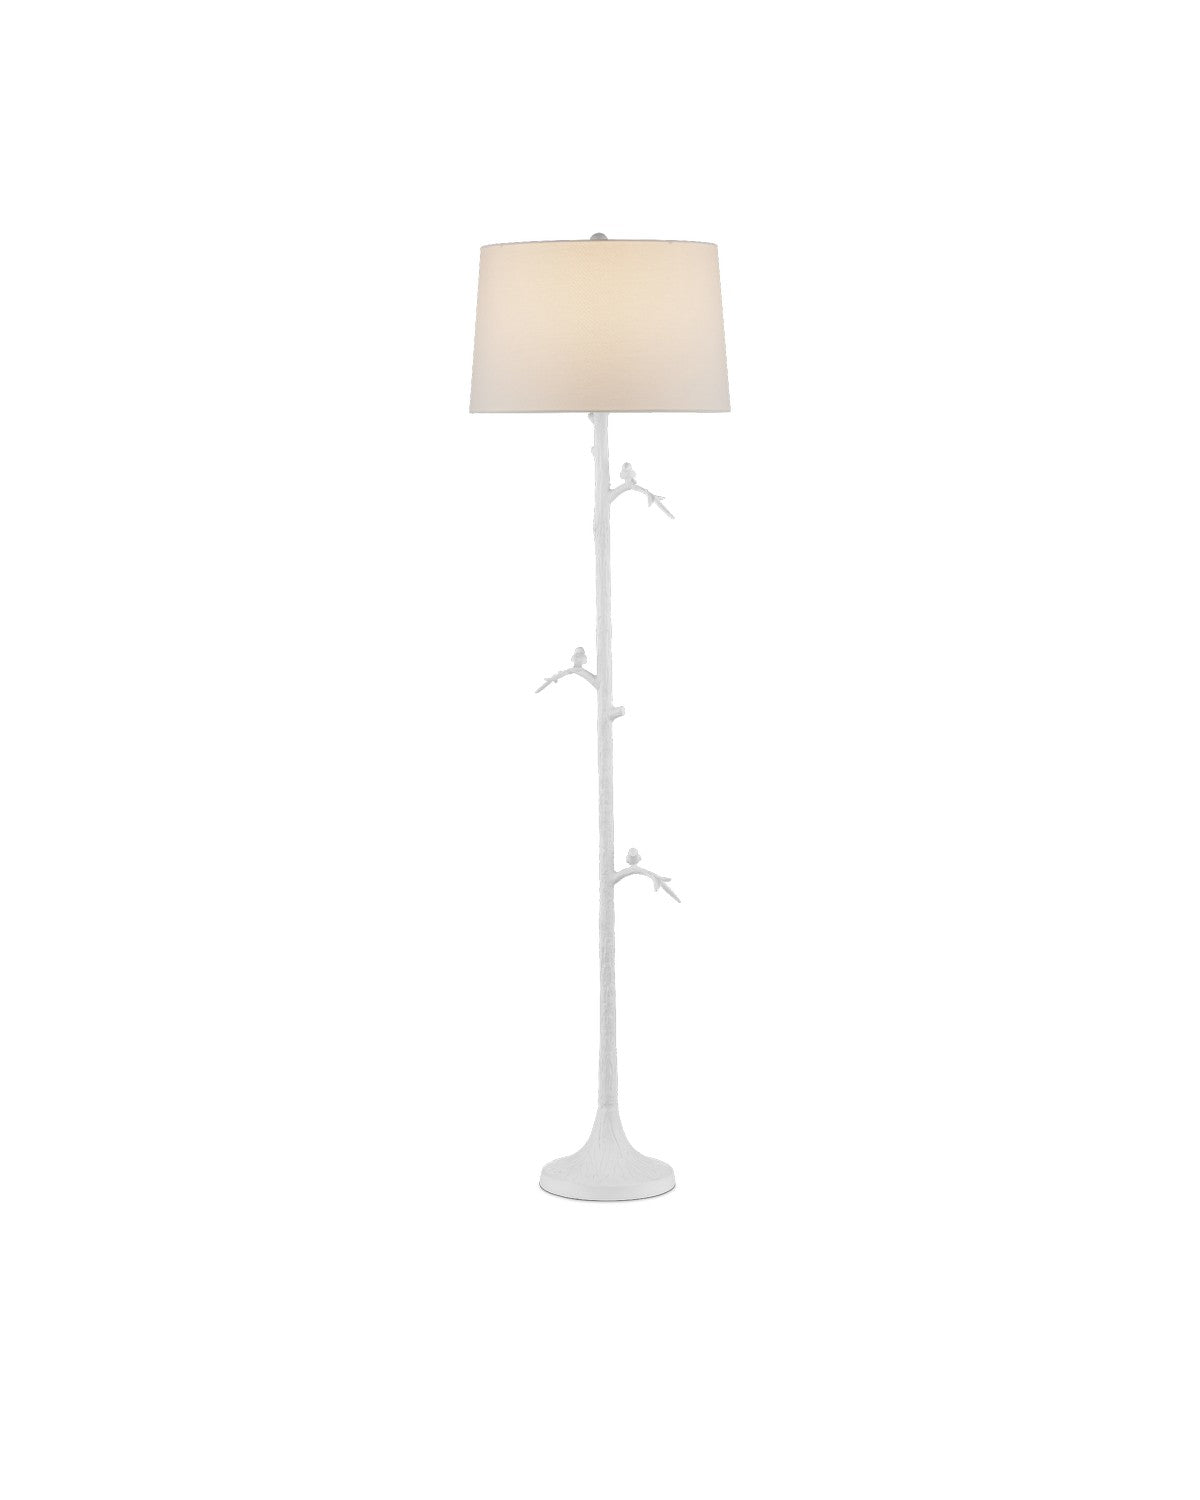 Currey and Company - 8000-0158 - One Light Floor Lamp - Gesso White